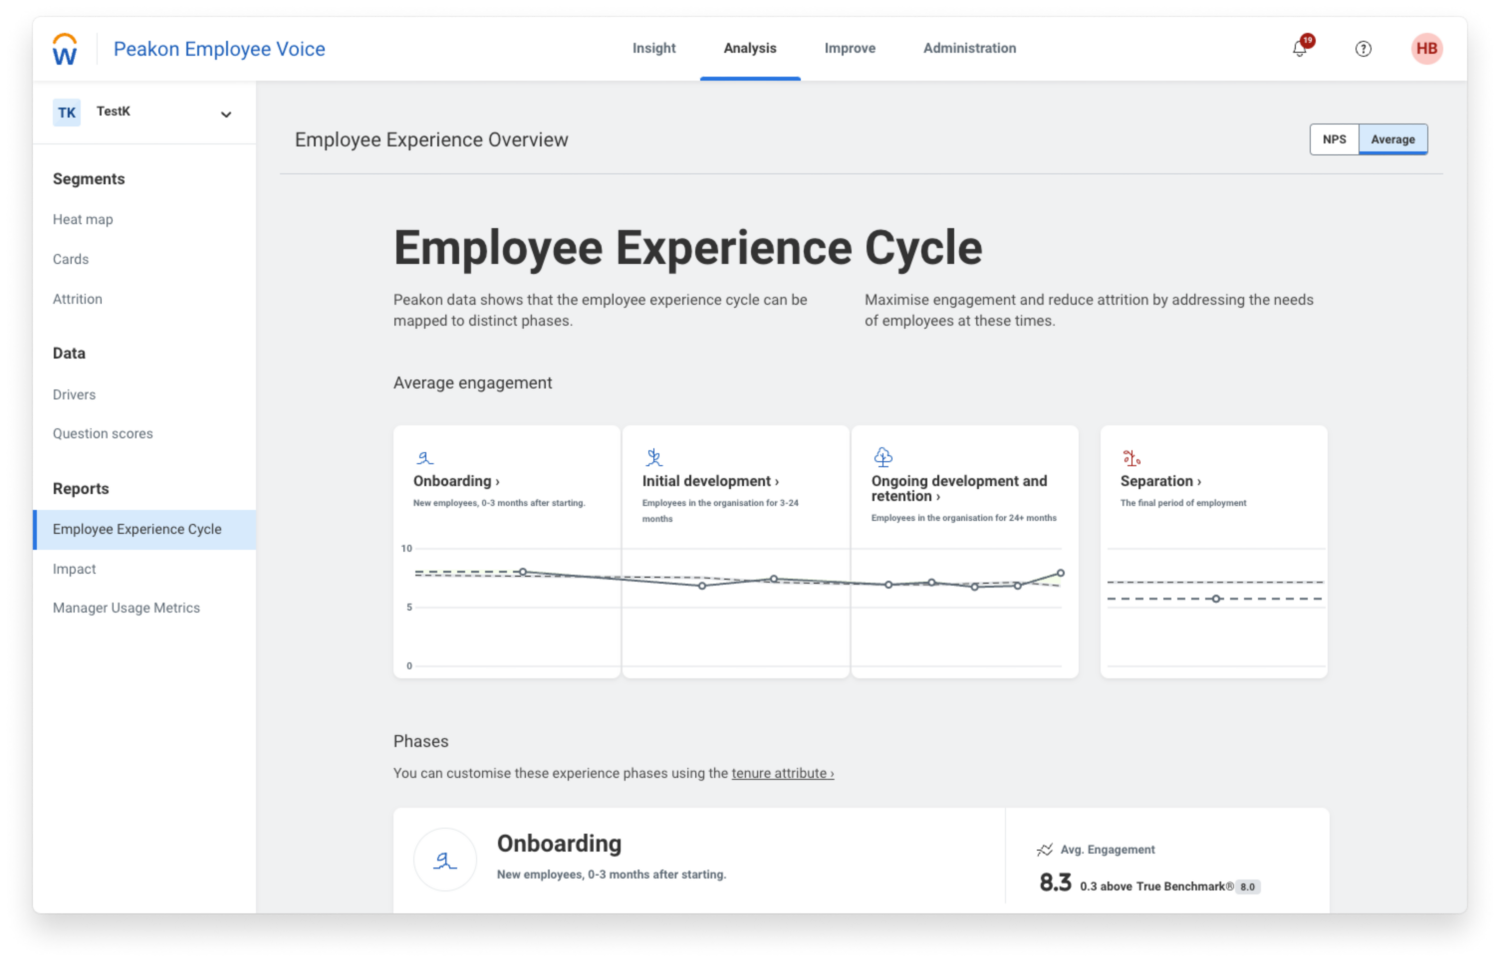 Workday Peakon Employee Voice dashboard showing engagement metrics for the employee experience cycle.